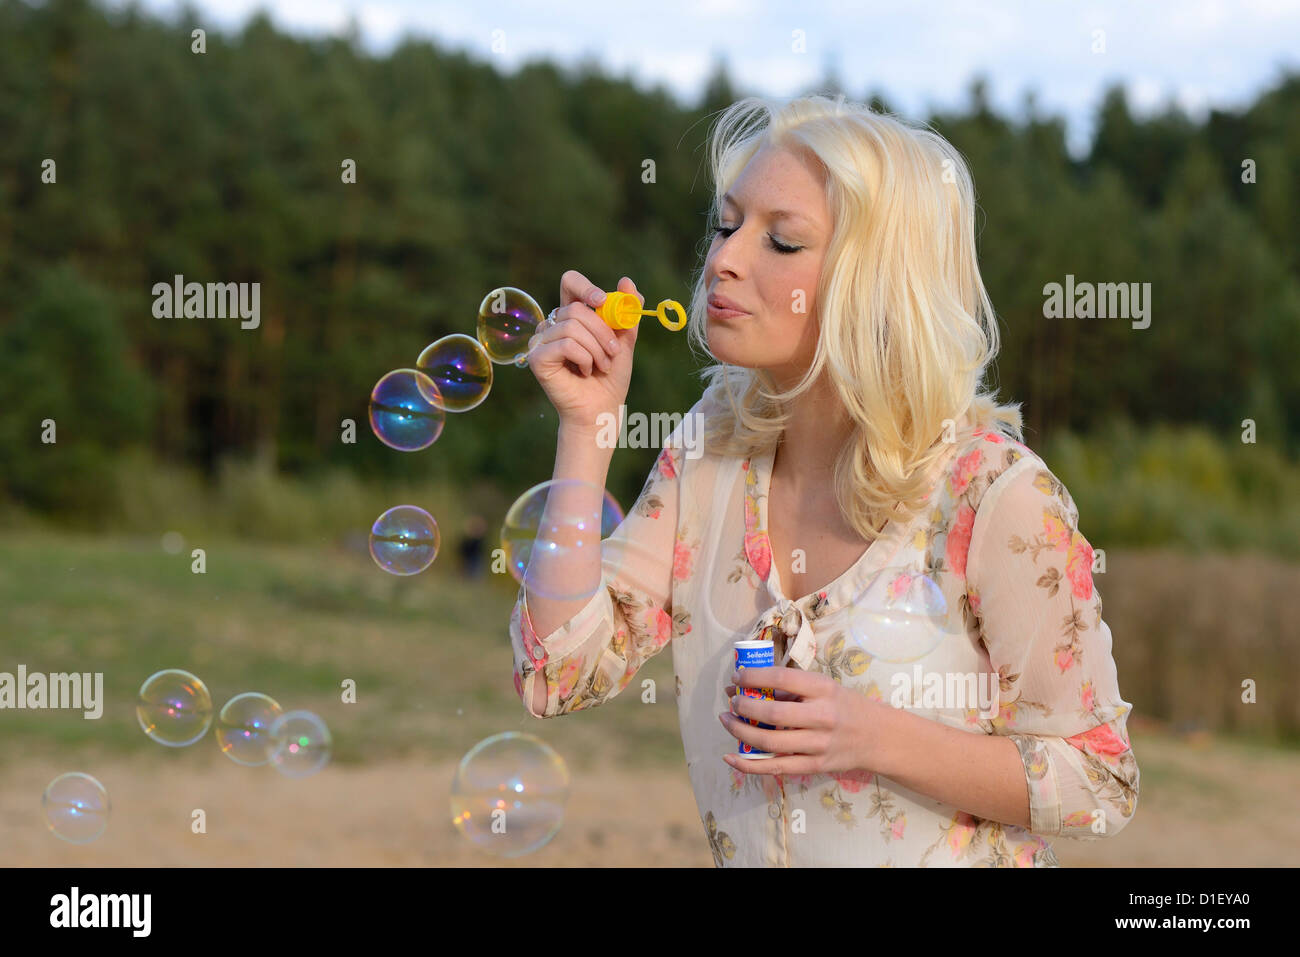 Happy young blonde woman blowing soap bubbles outdoors Banque D'Images